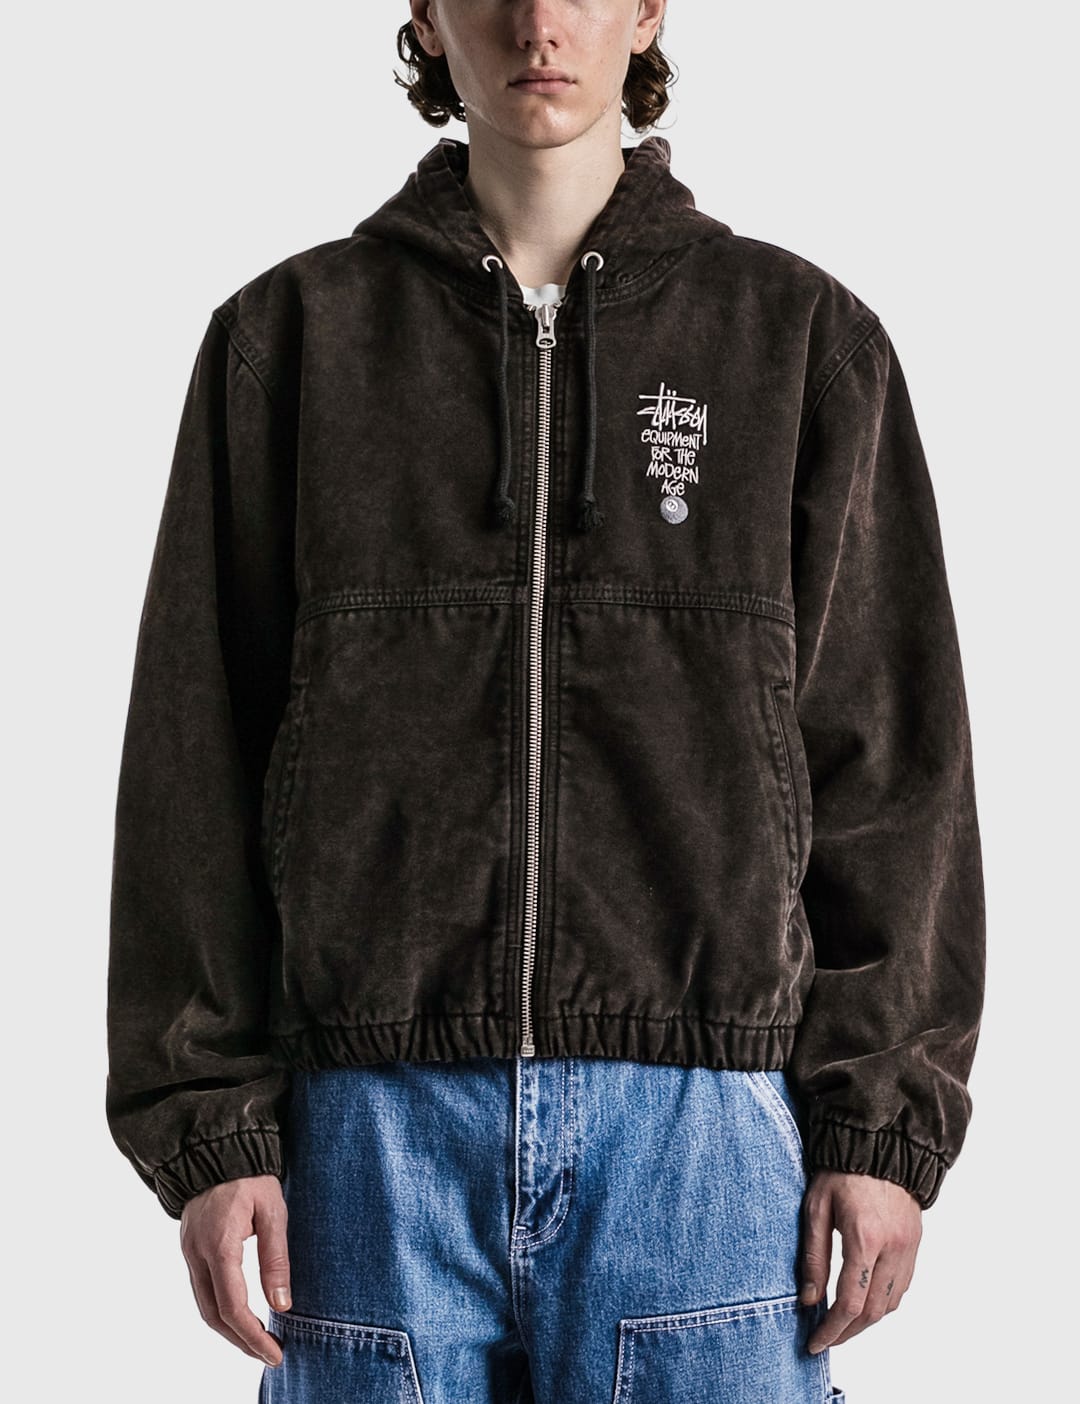 Stüssy - Canvas Insulated Work Jacket | HBX - Globally Curated